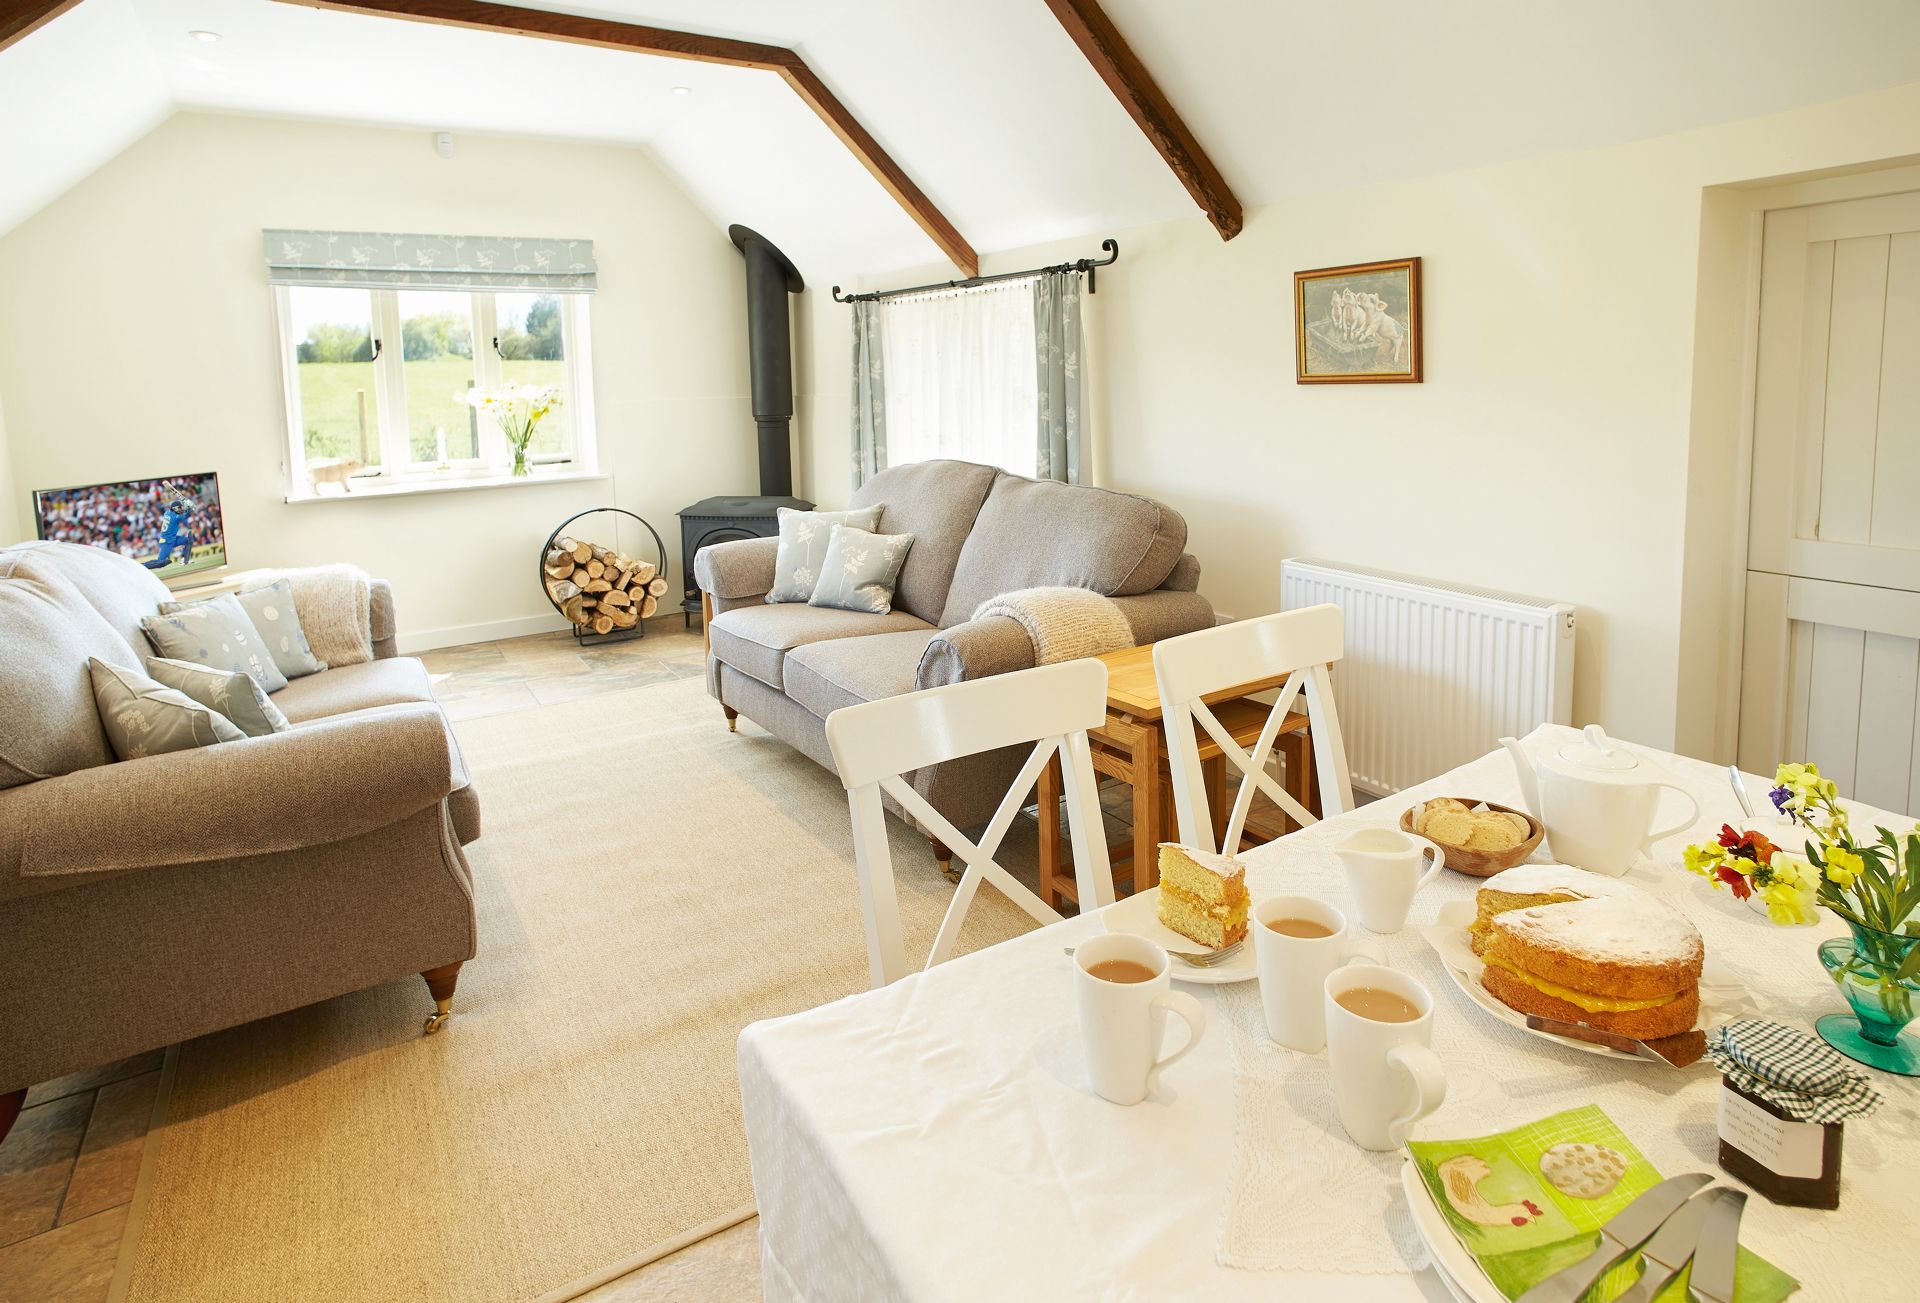 Details about a cottage Holiday at Downclose Piggeries